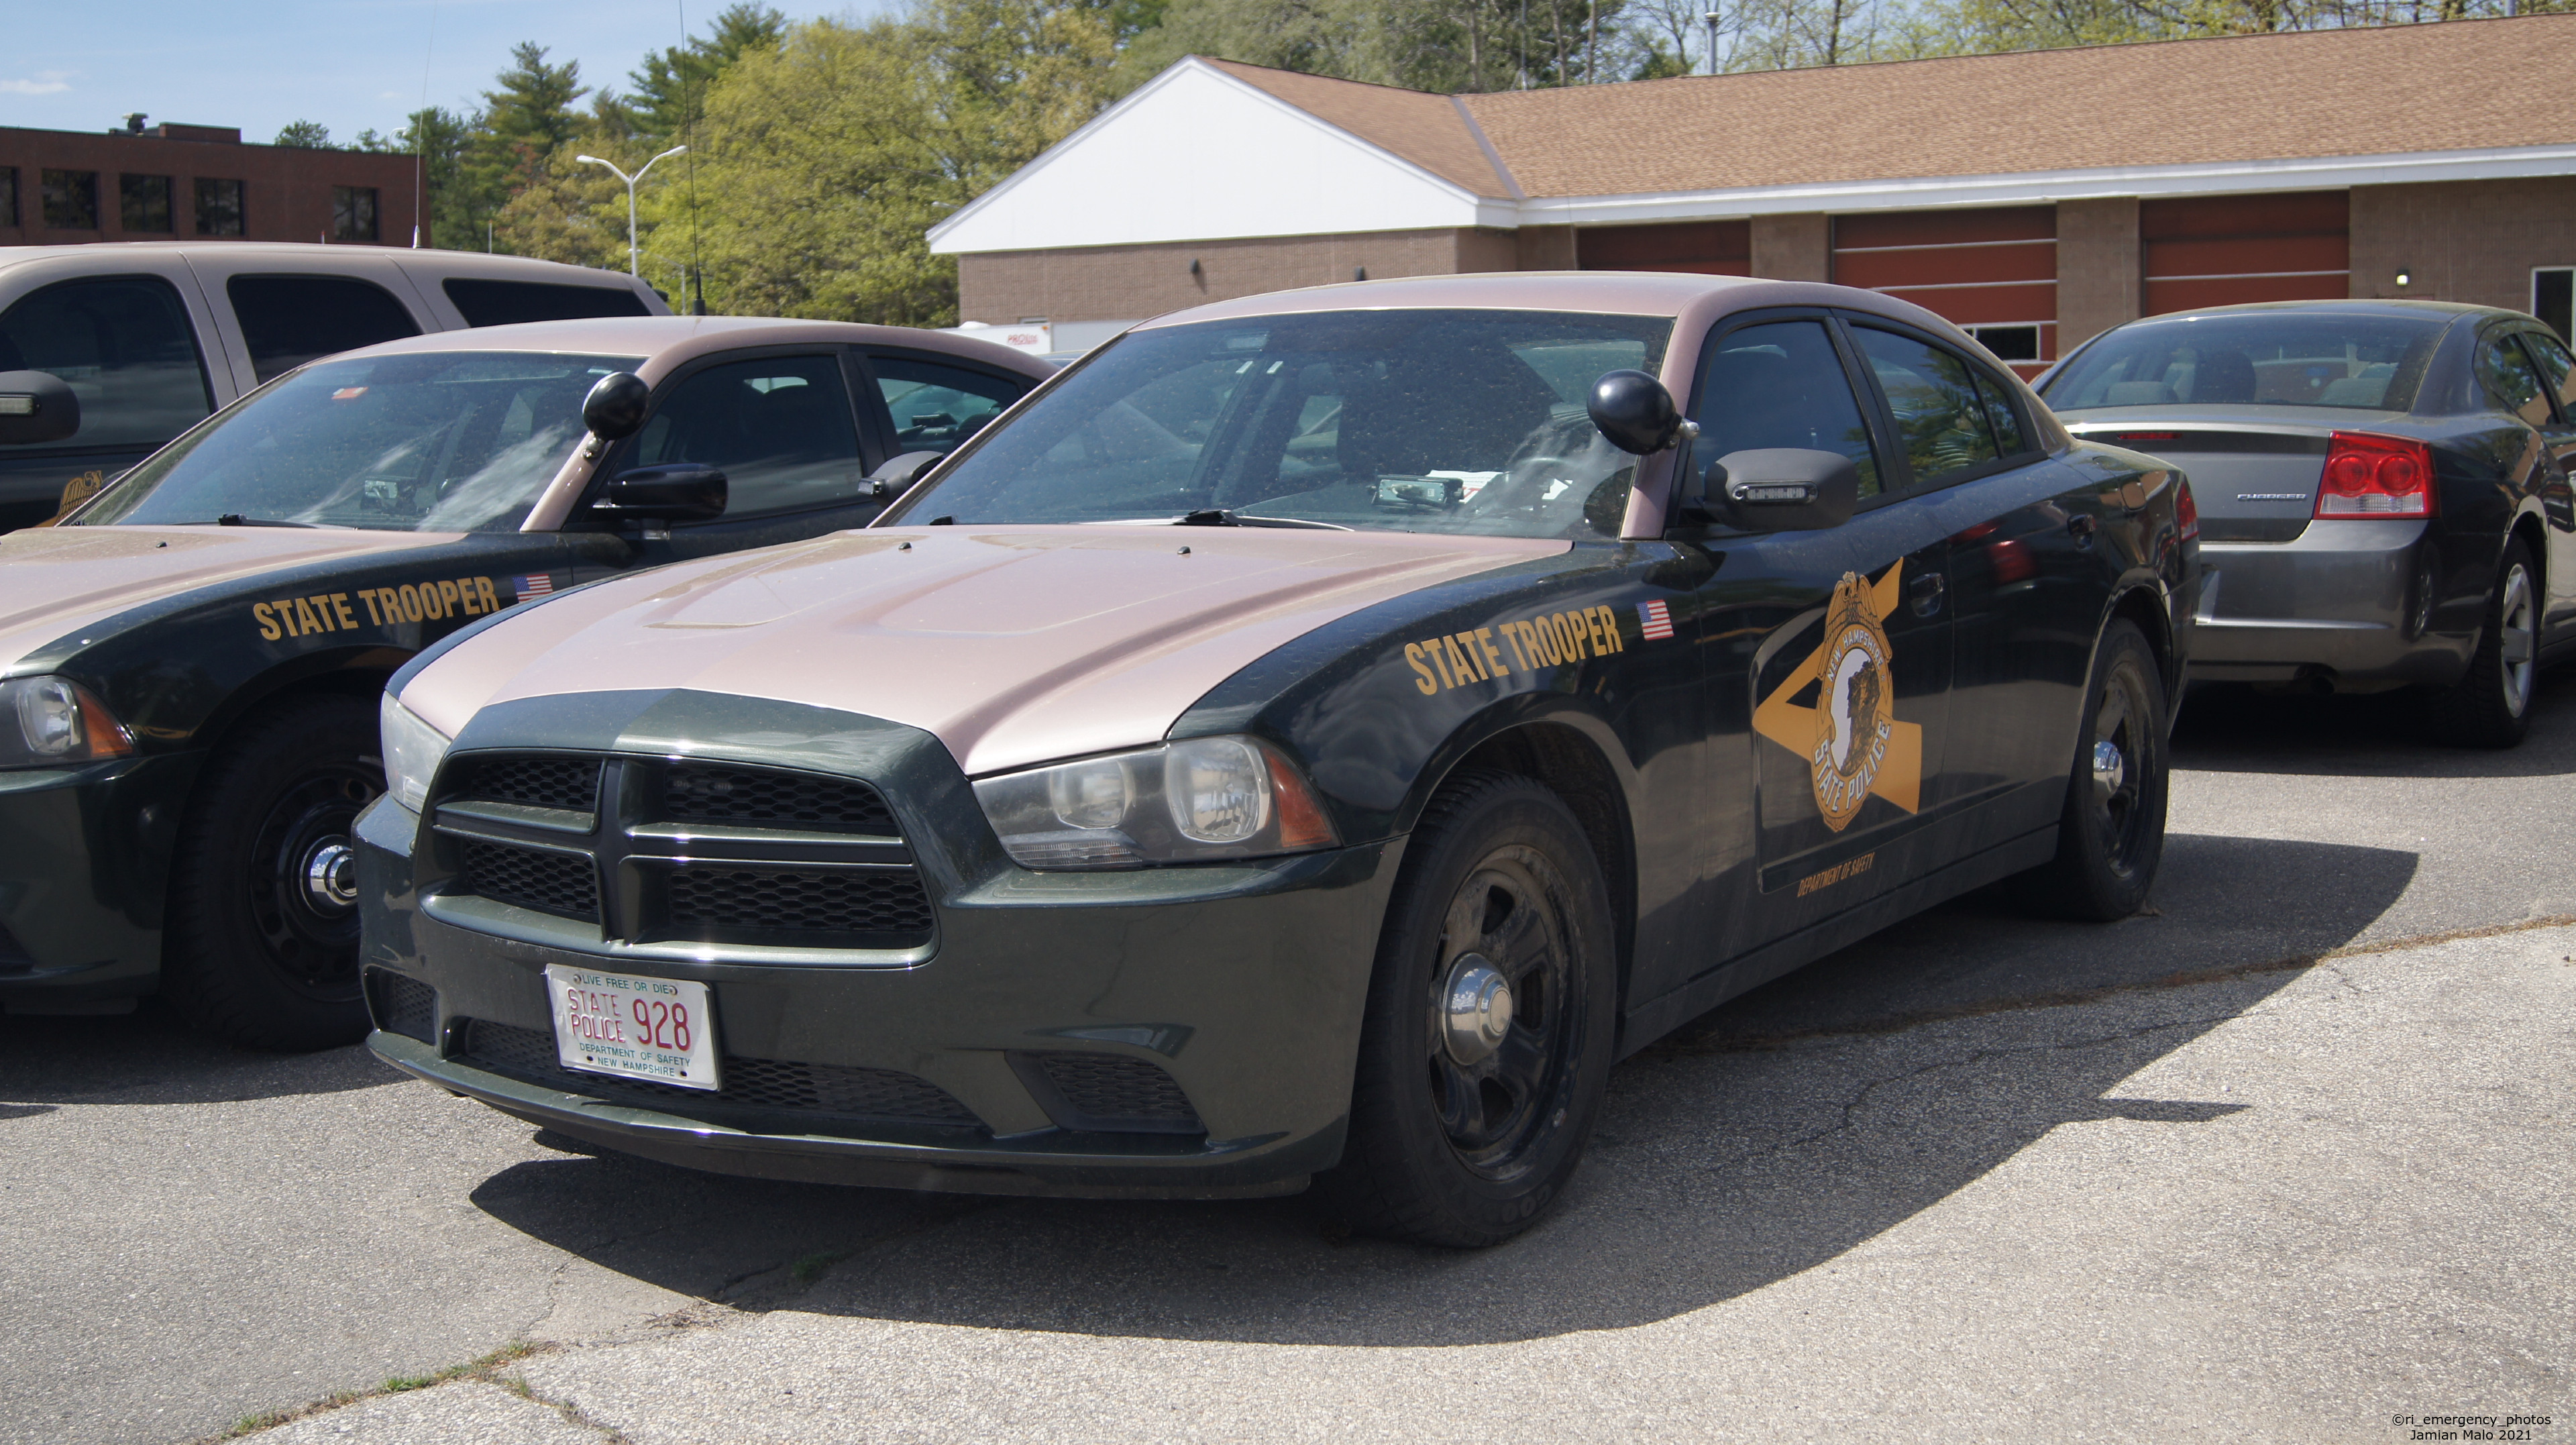 A photo  of New Hampshire State Police
            Cruiser 928, a 2011-2014 Dodge Charger             taken by Jamian Malo